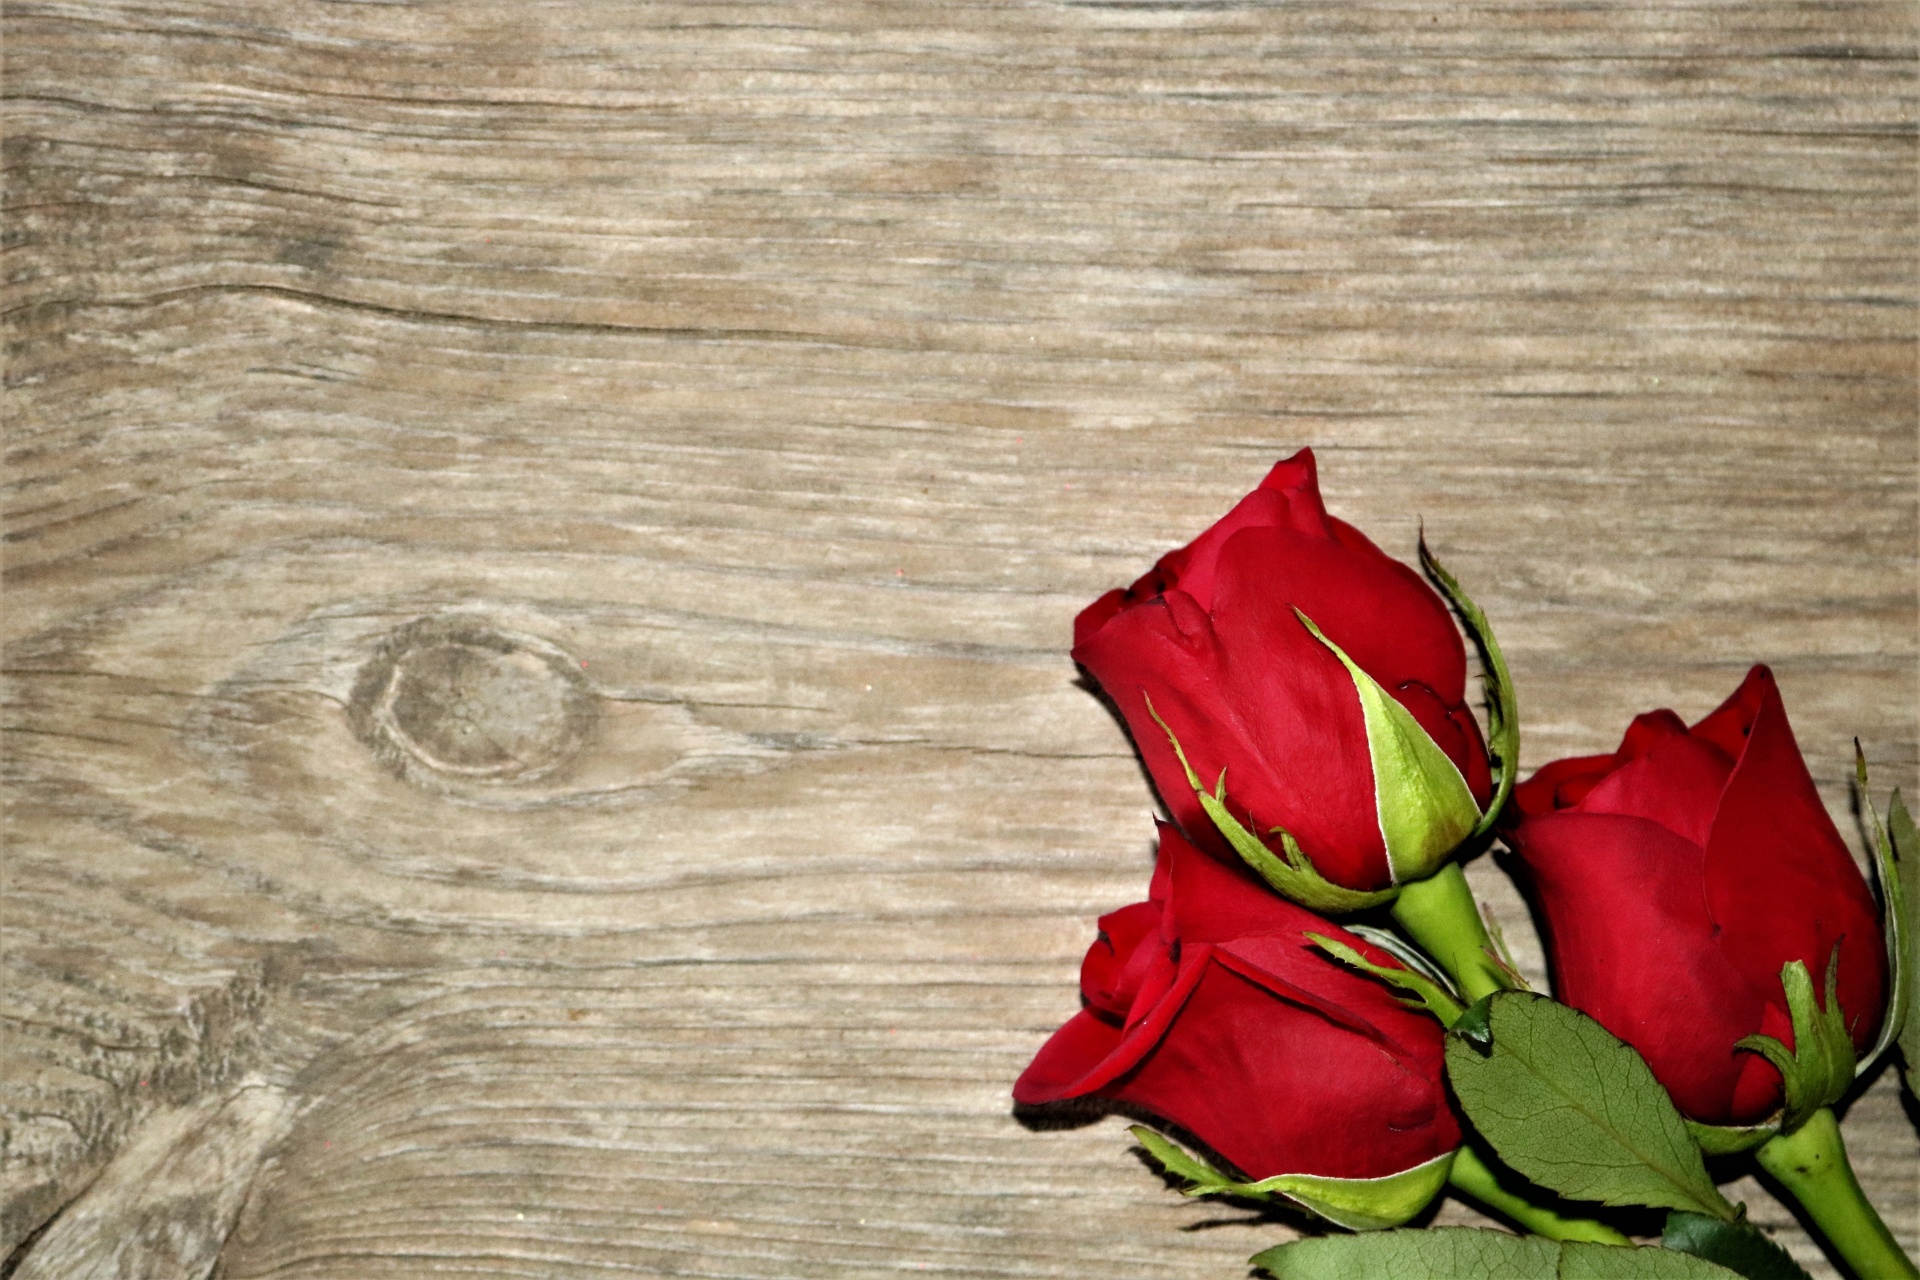 Three Red Roses On Wood Background